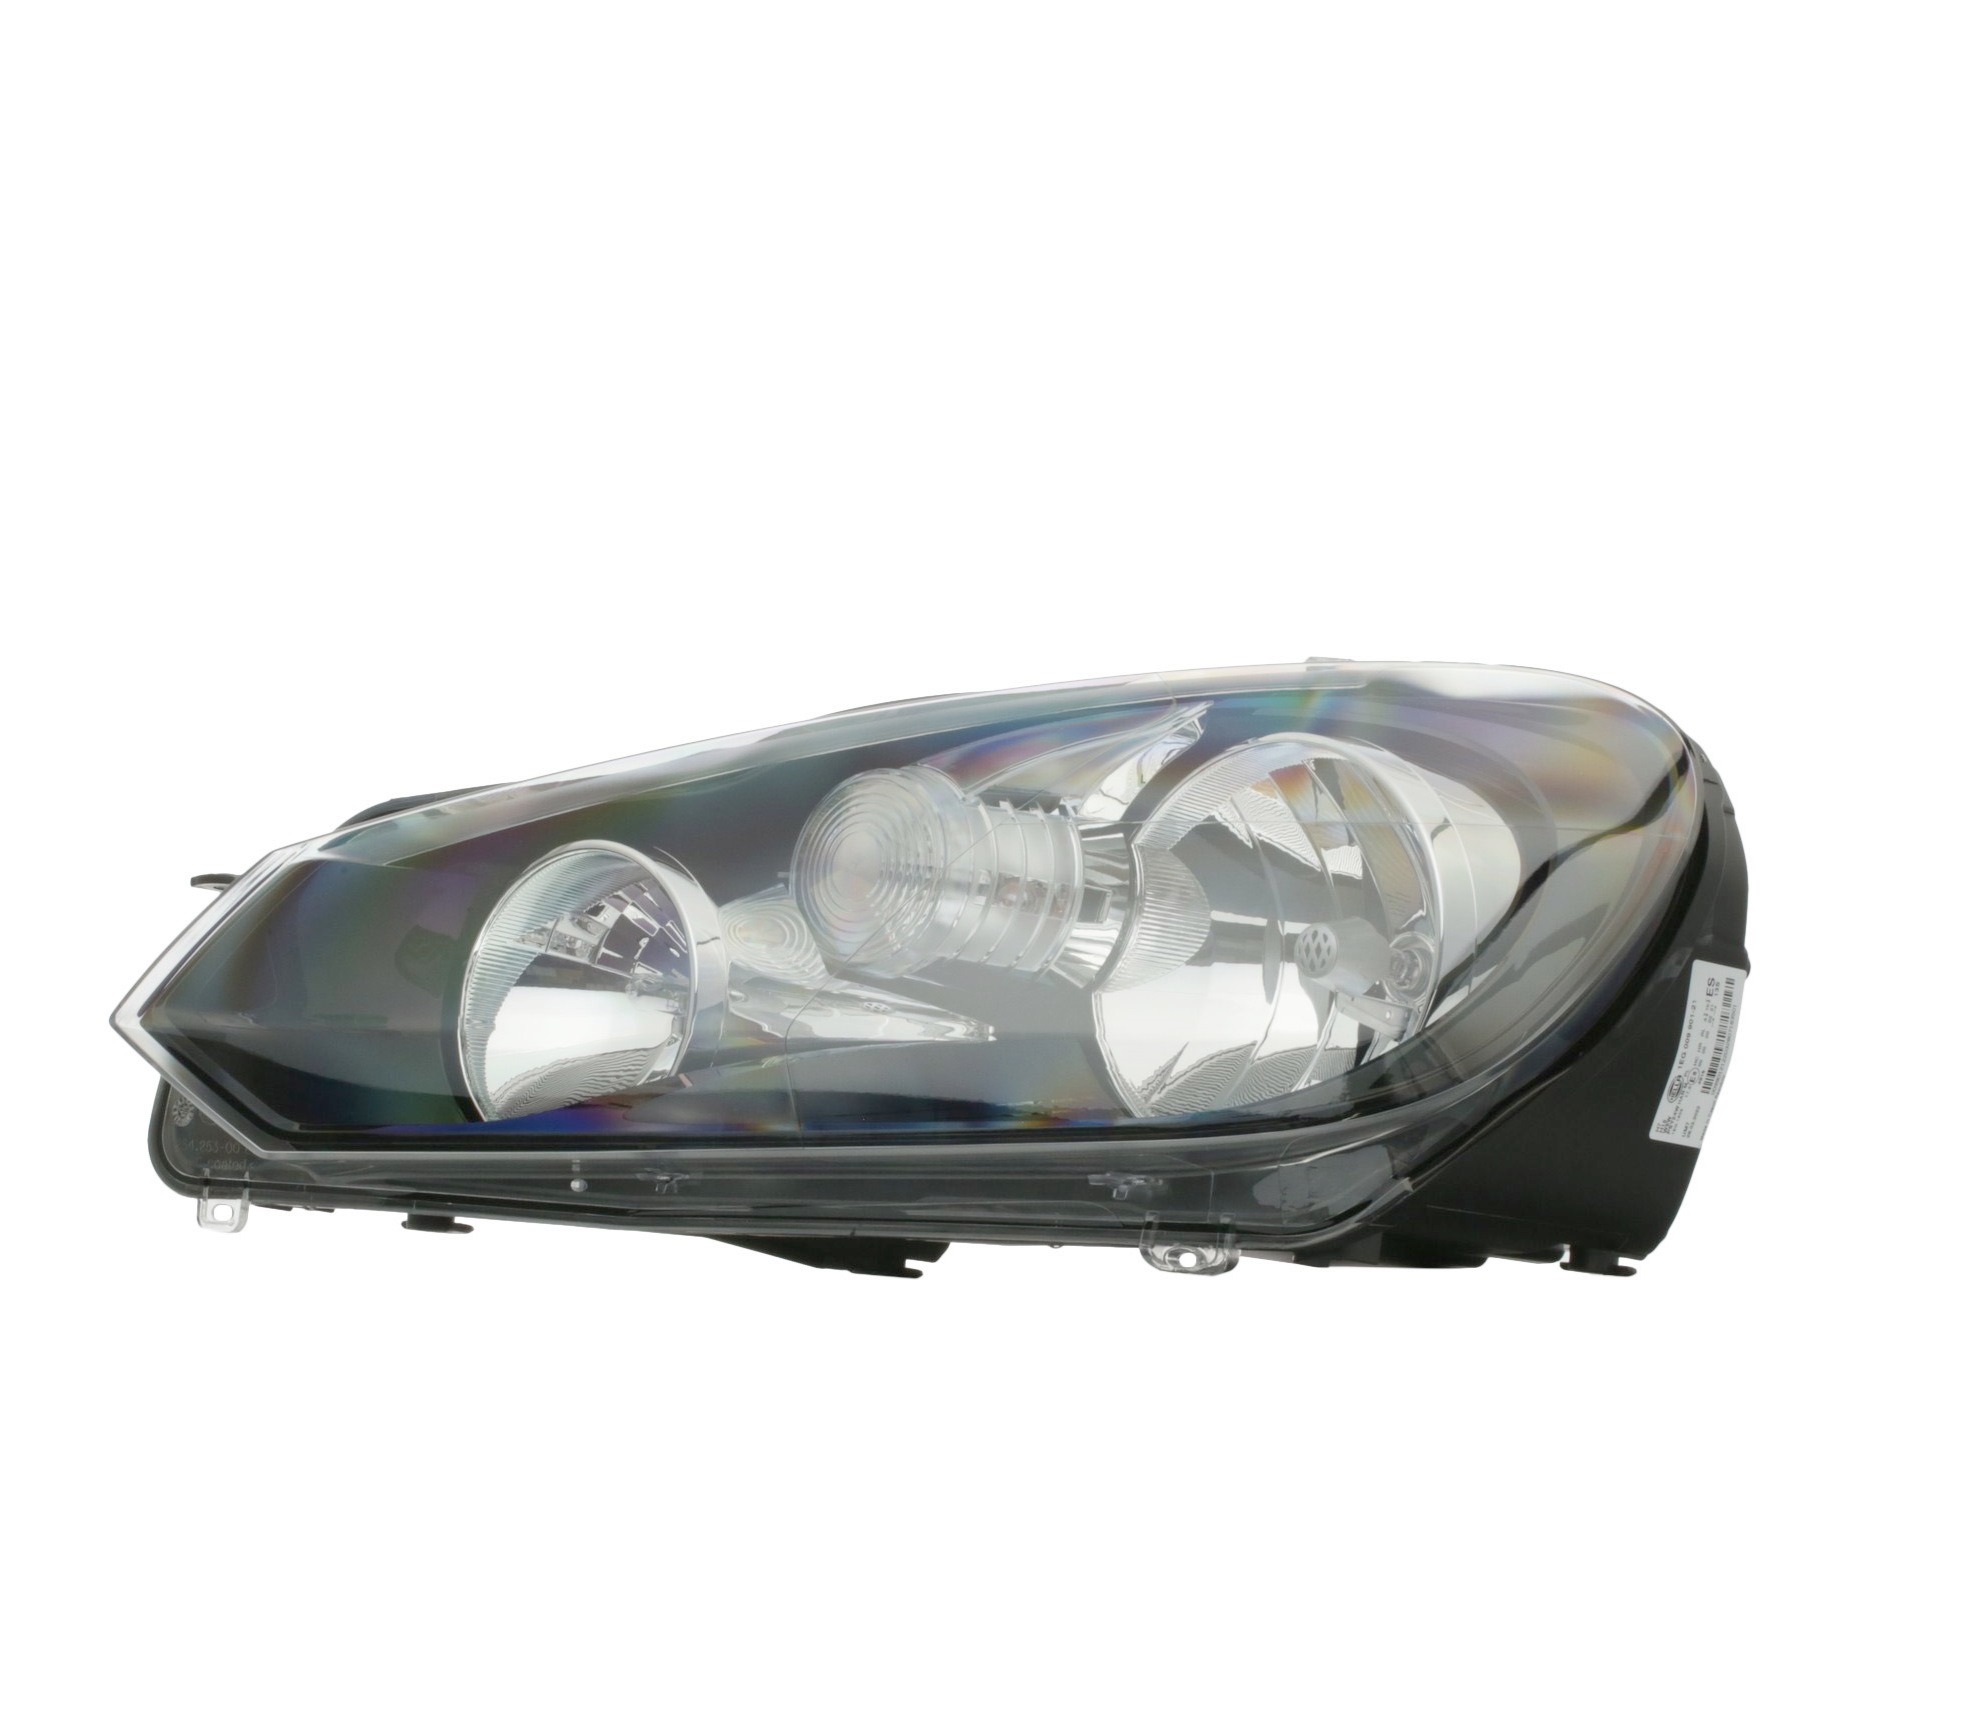 E8 4816 HELLA Left, W5W, H7, H15, PSY24W, Halogen, FF, 12V, with low beam, with indicator, with position light, with high beam, with daytime running light, for right-hand traffic, with motor for headlamp levelling, with bulbs Left-hand/Right-hand Traffic: for right-hand traffic Front lights 1EG 009 901-211 buy